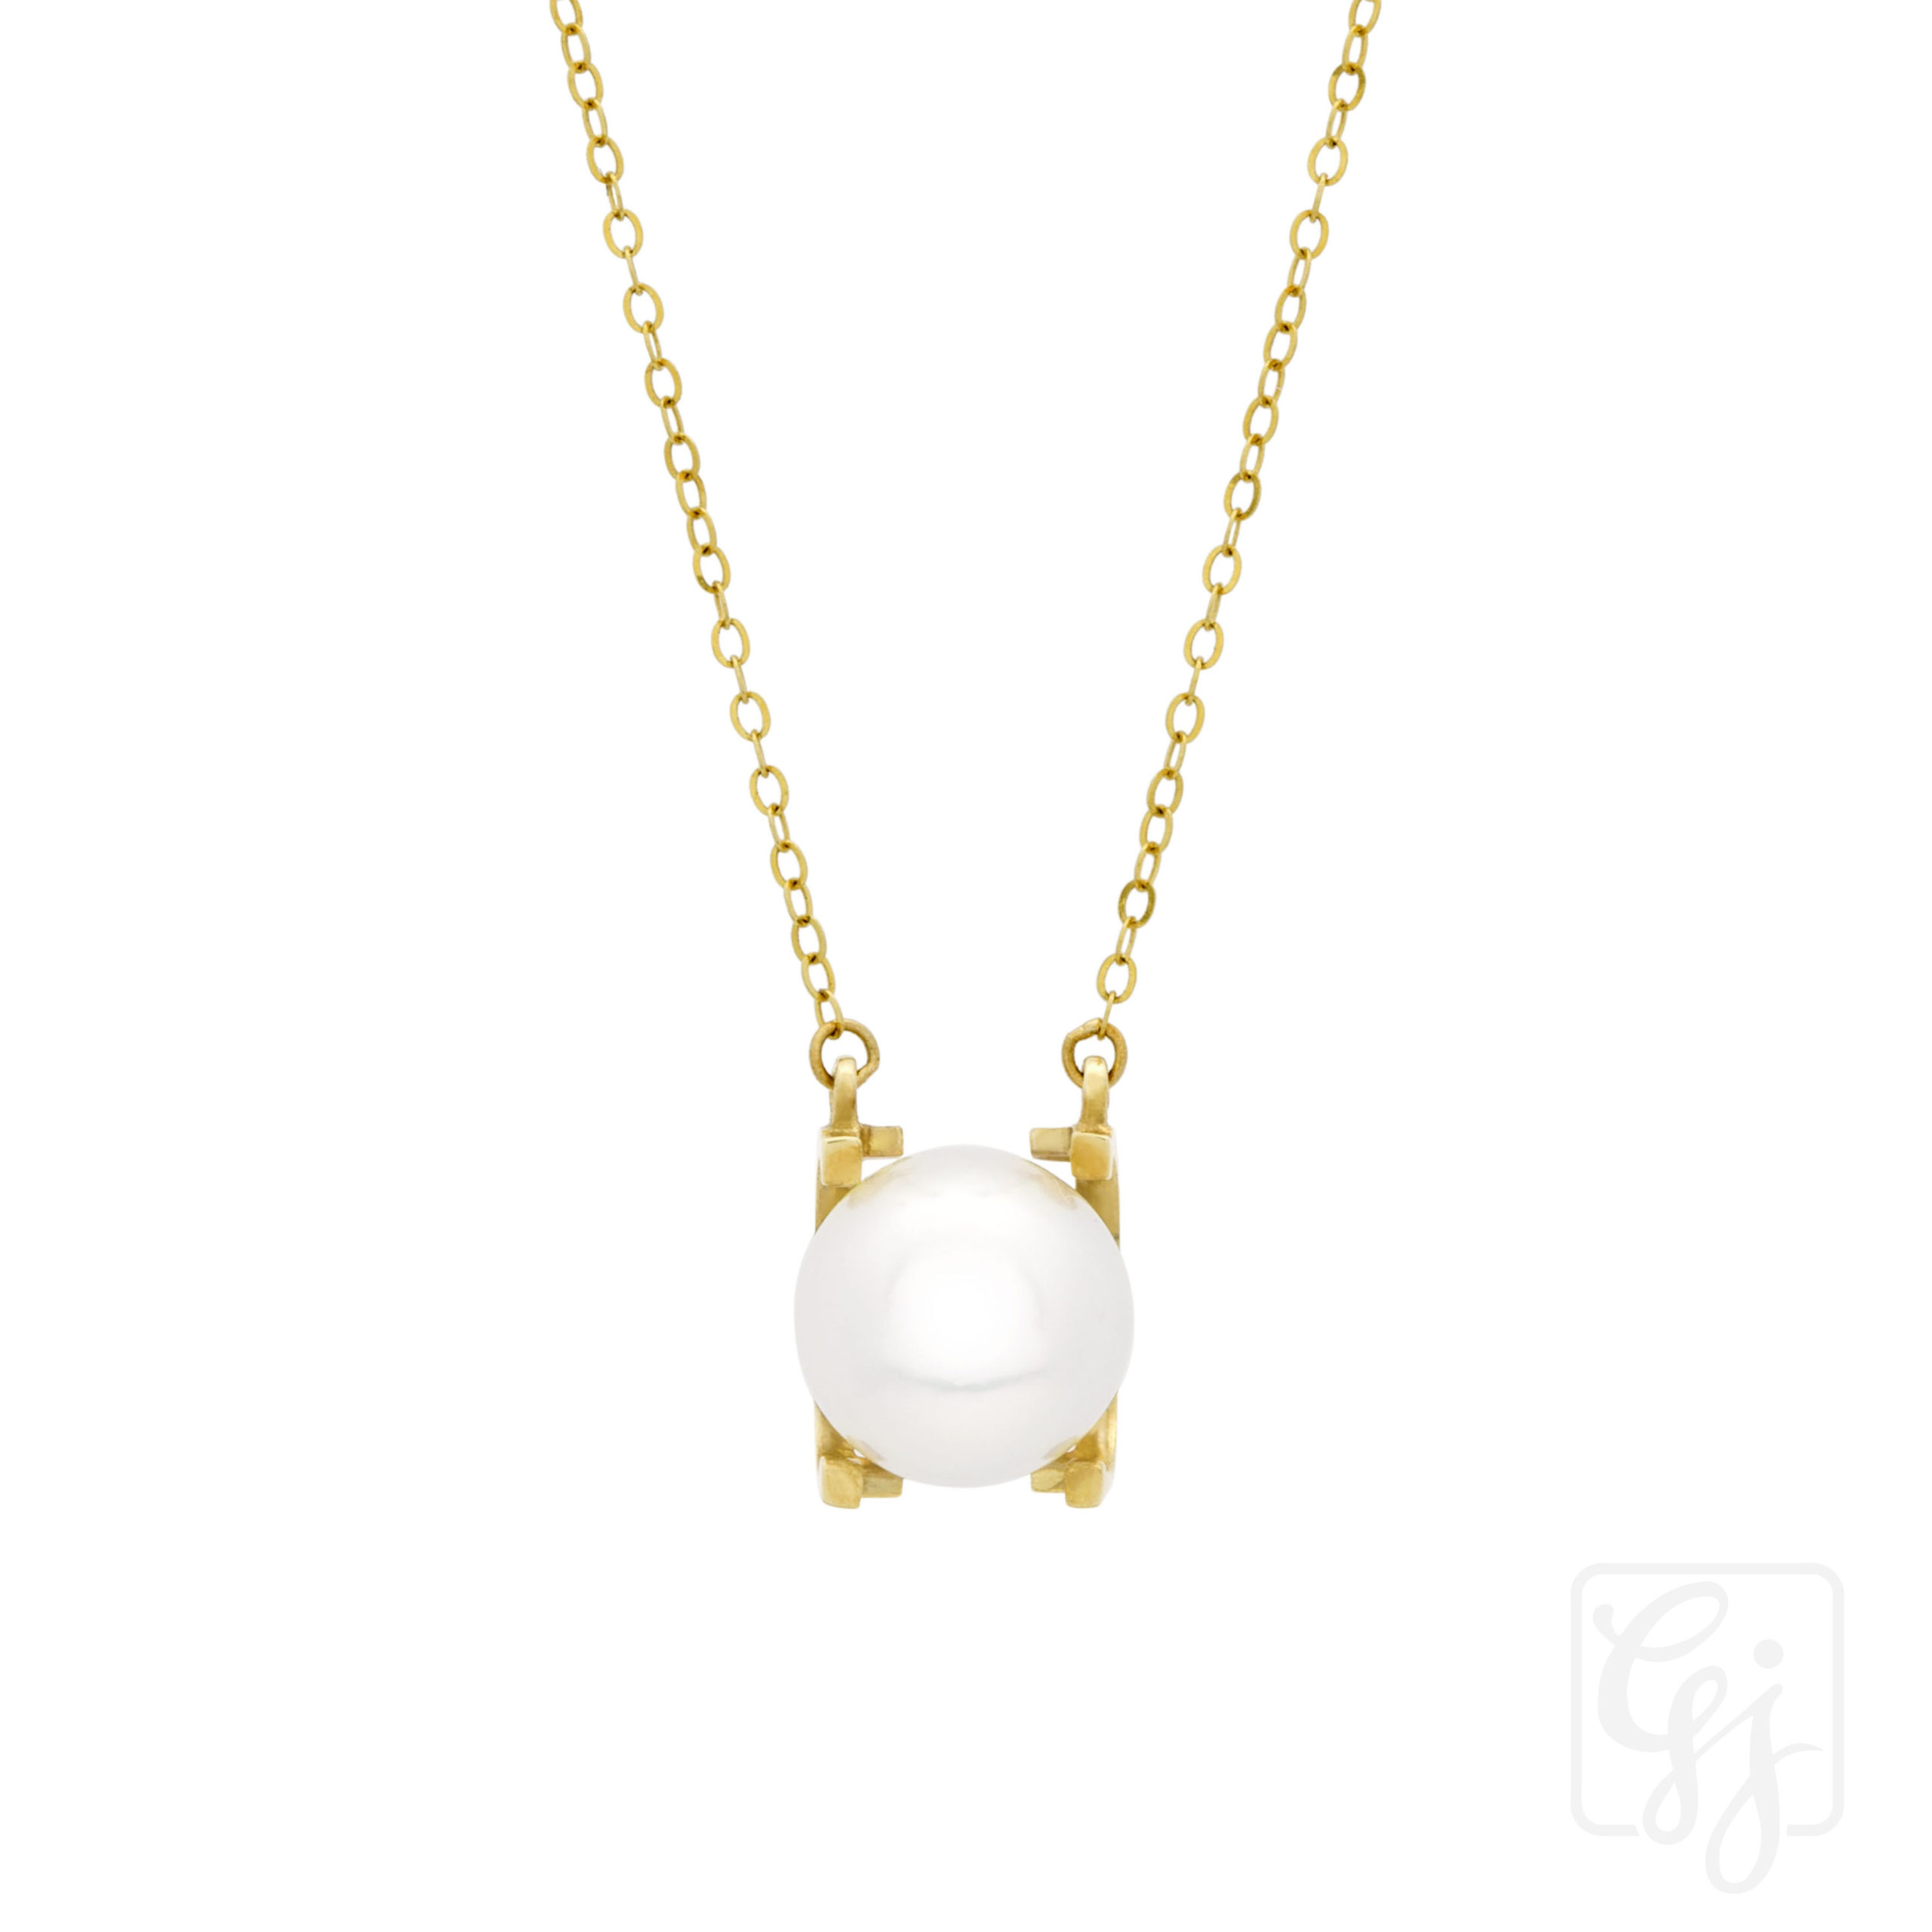 18K Yellow Gold JCP Necklace